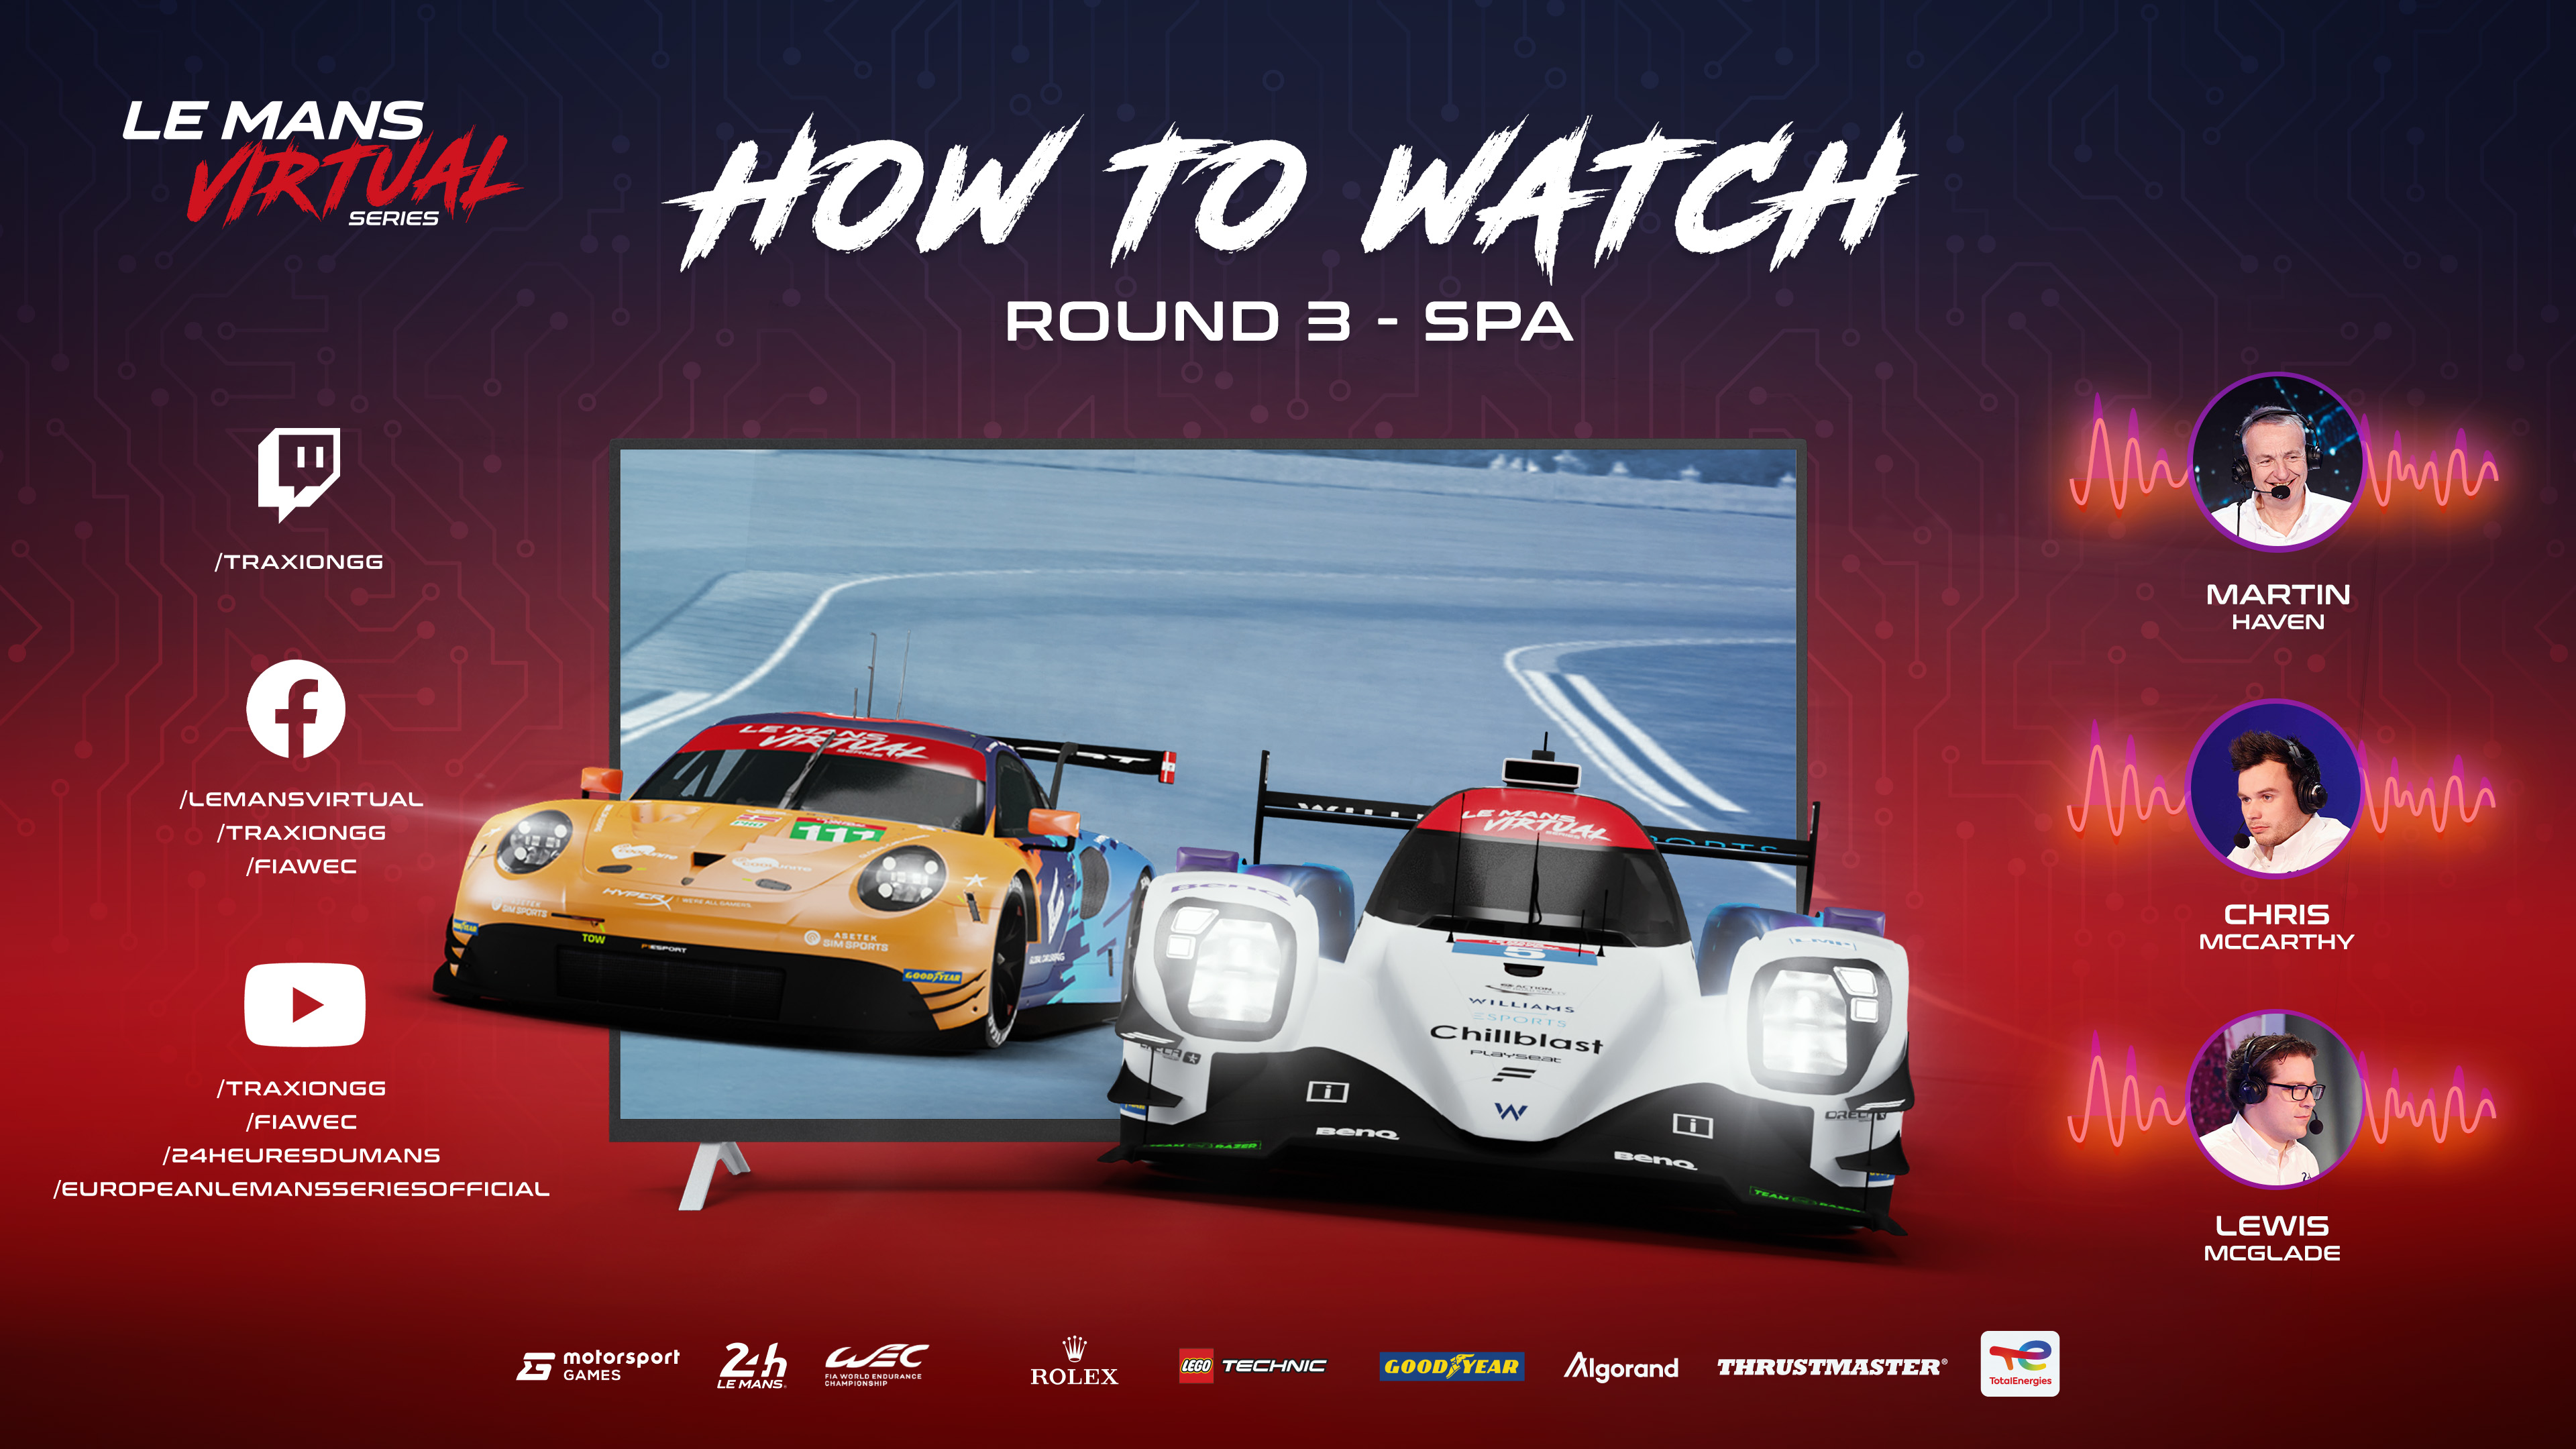 Motorsport Games - Stars come out for 6H Spa - 3rd round of Le Mans Virtual Series